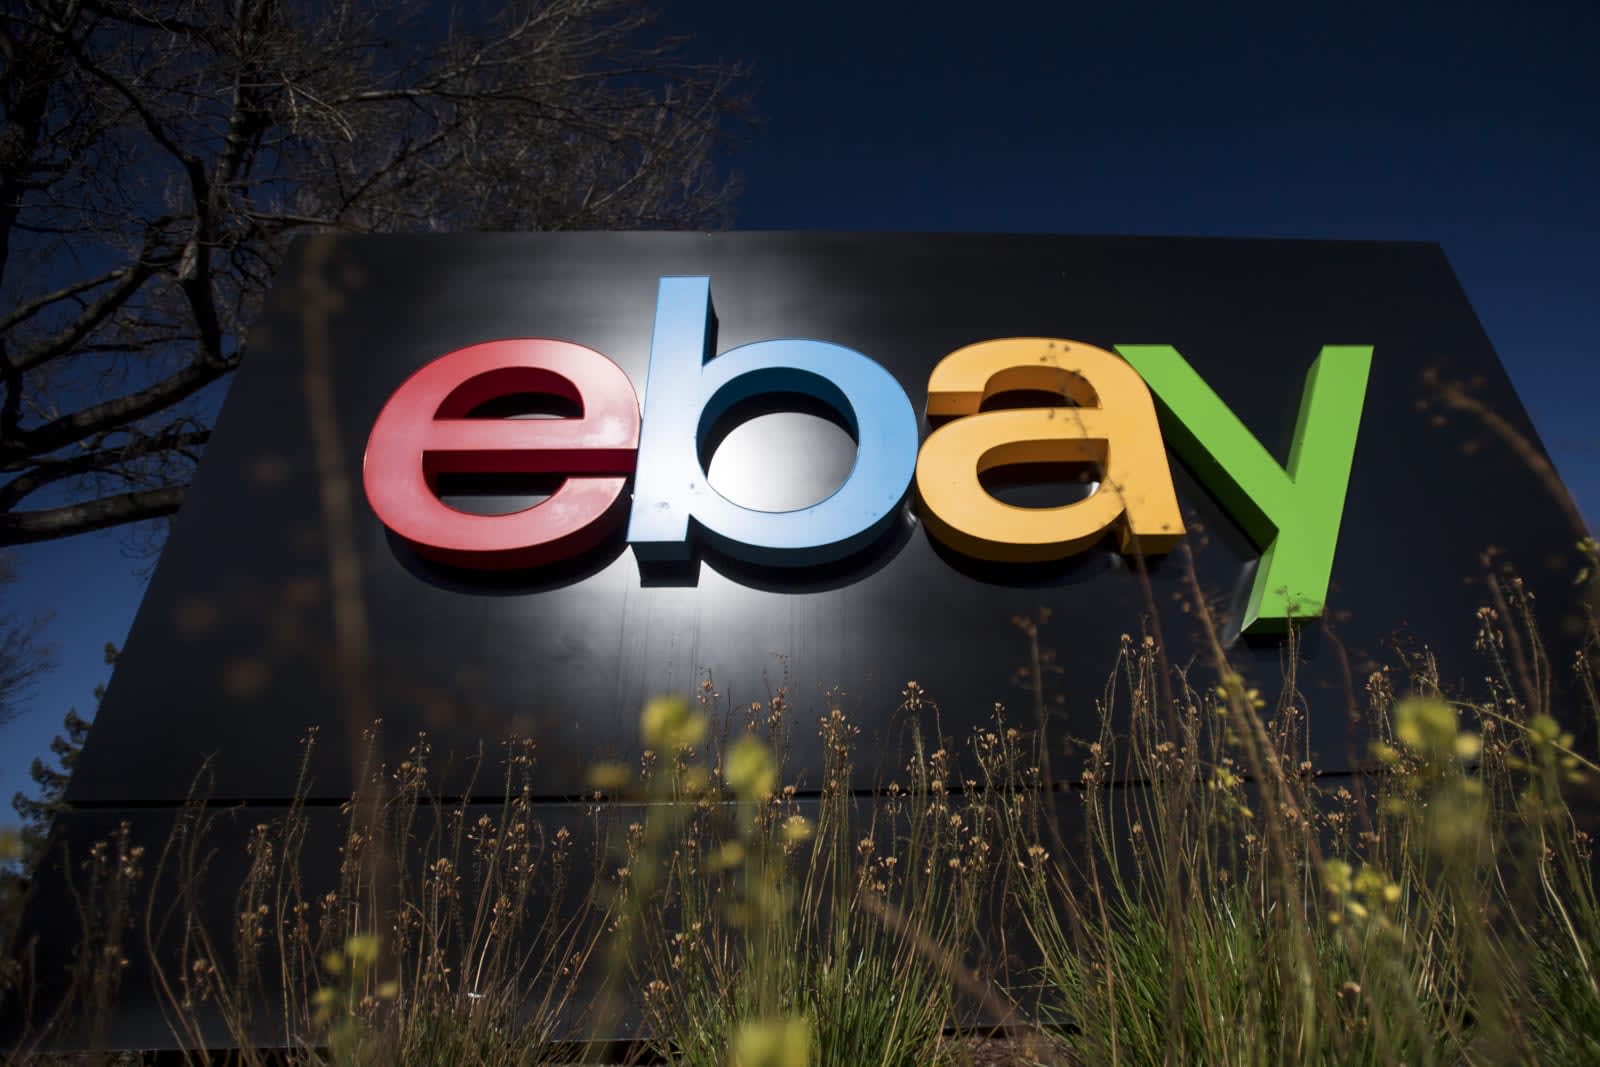 eBay will match prices from Amazon and Walmart on certain items1600 x 1067